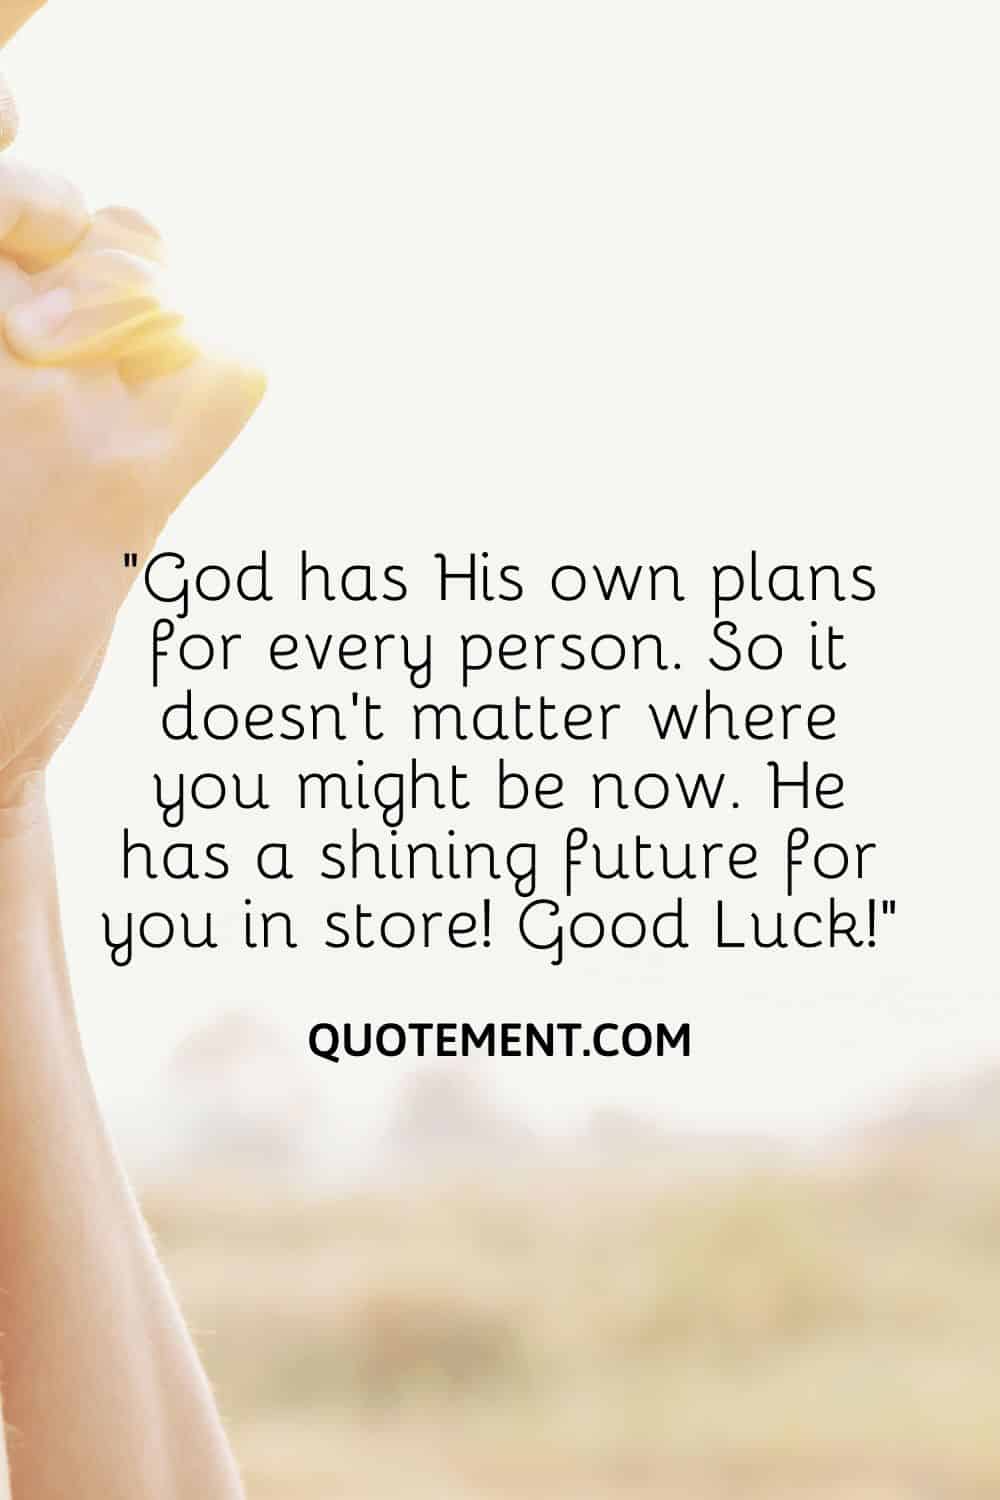 “God has His own plans for every person. So it doesn’t matter where you might be now. He has a shining future for you in store! Good Luck!”